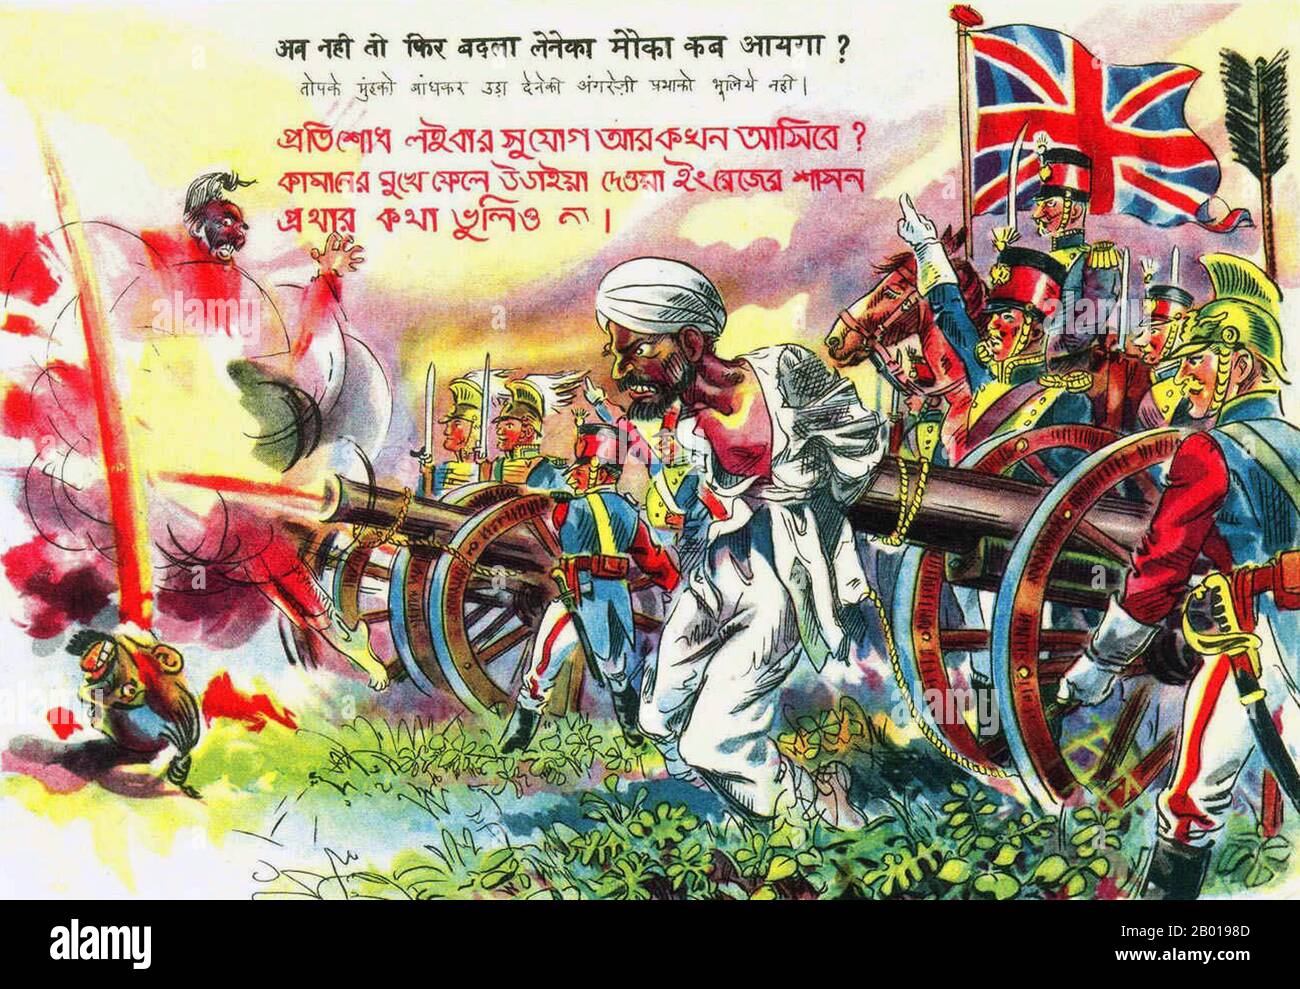 India: Japanese WWII propaganda leaflet showing the British blowing Indians from the mouths of cannons - a reference to the Indian War of Independence of 1857, c. 1941-1945.  China Burma India Theatre (CBI) was the name used by the United States Army for its forces operating in conjunction with British and Chinese Allied air and land forces in China, Burma, and India during World War II. Well-known US units in this theatre included the Flying Tigers, transport and bomber units flying the Hump, and the 1st Air Commando Group, the engineers who built Ledo Road. Stock Photo